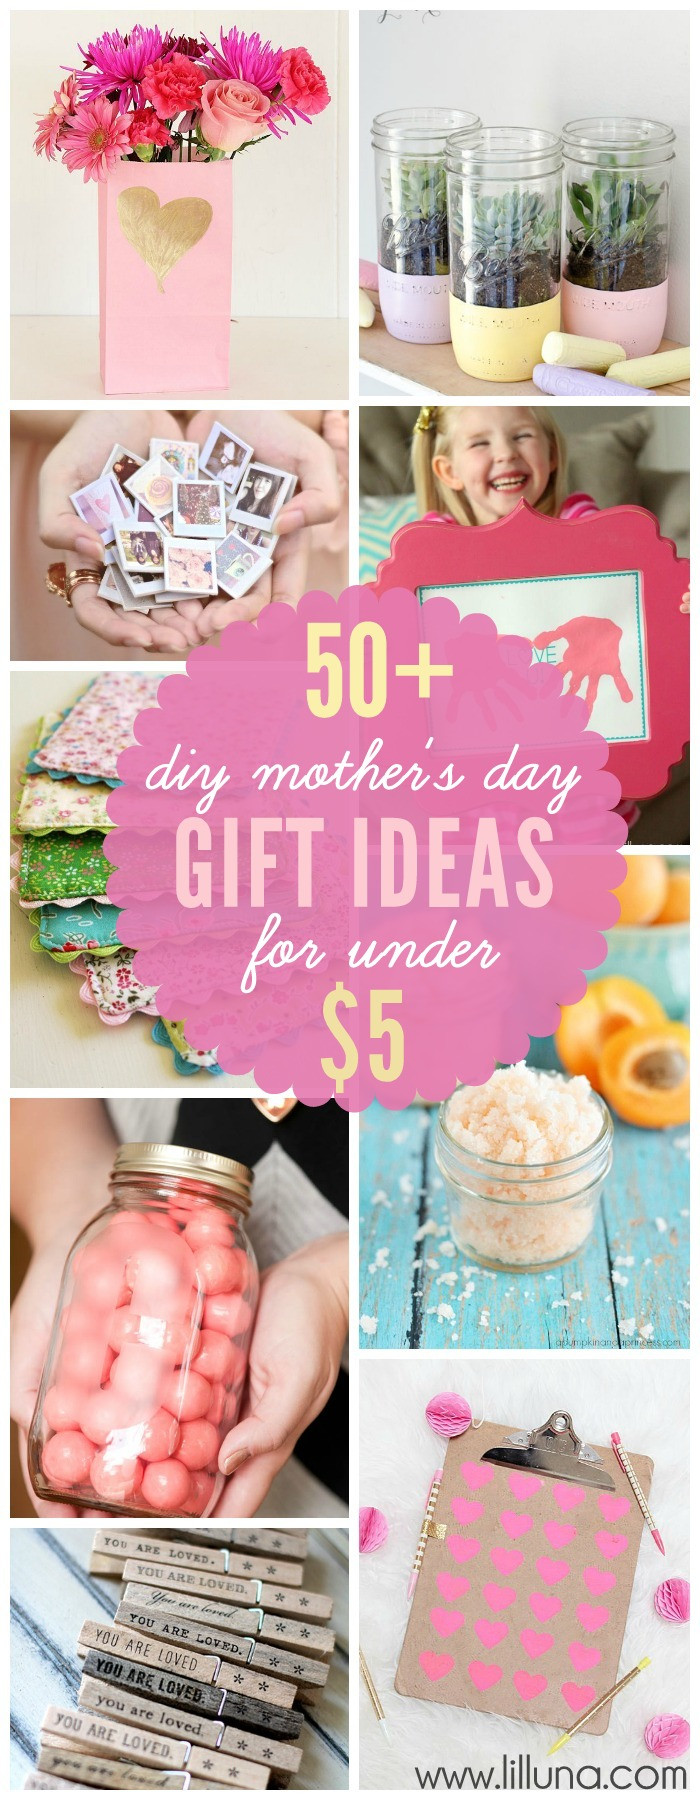 Mother'S Day Diy Gift Ideas
 DIY Mother s Day Gifts for under 5